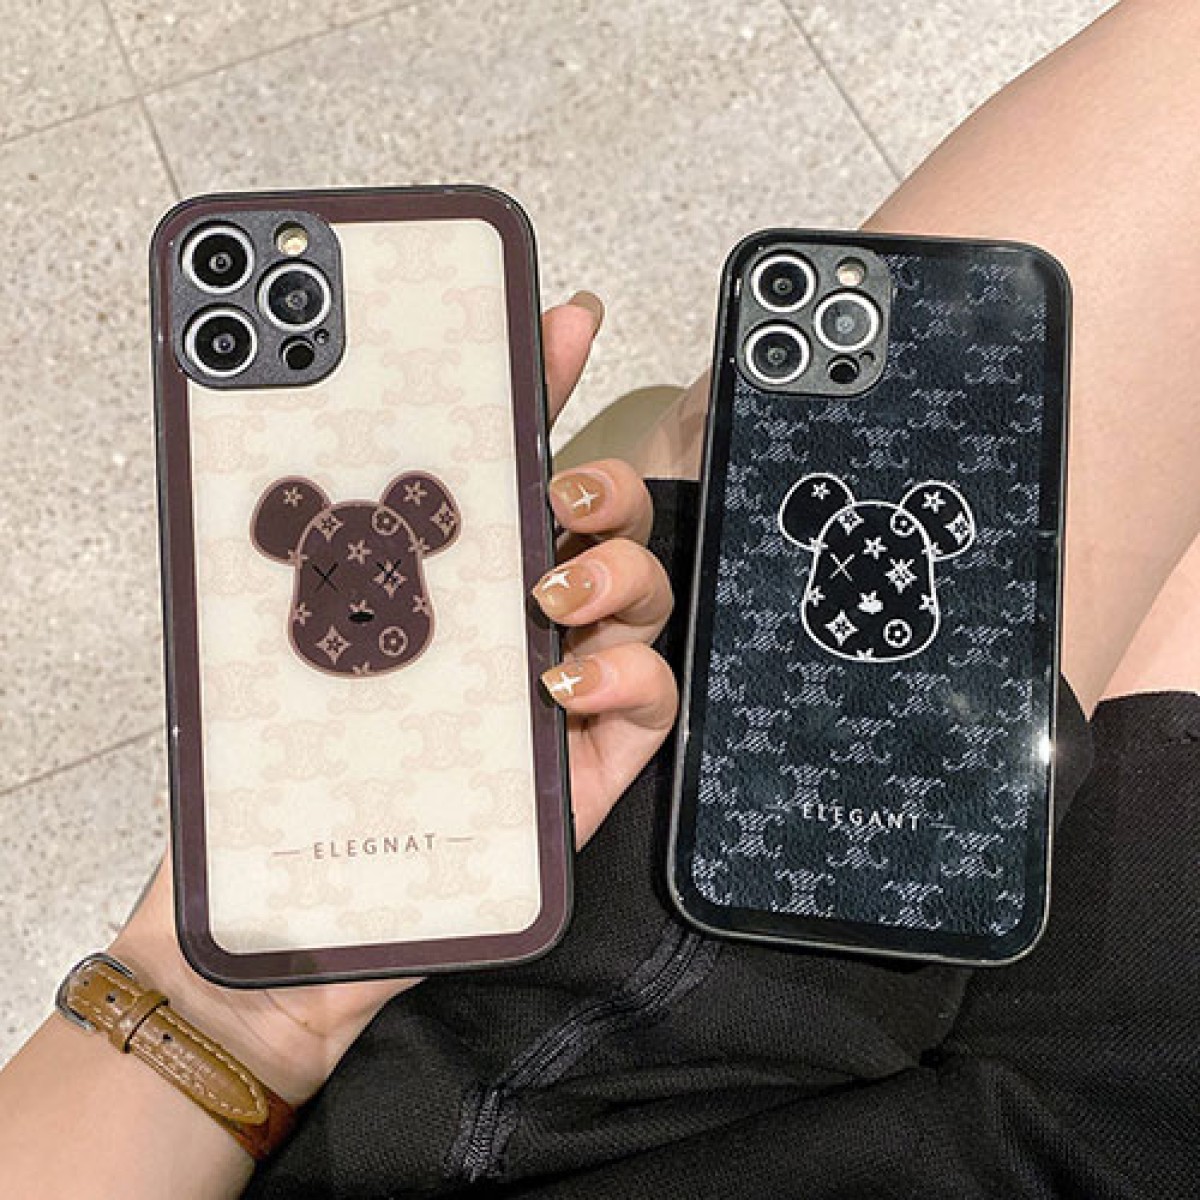 Ready stock LV monogram iPhone 7 8 SE2 X Xs Max 11 12 Pro Max case with  card holder